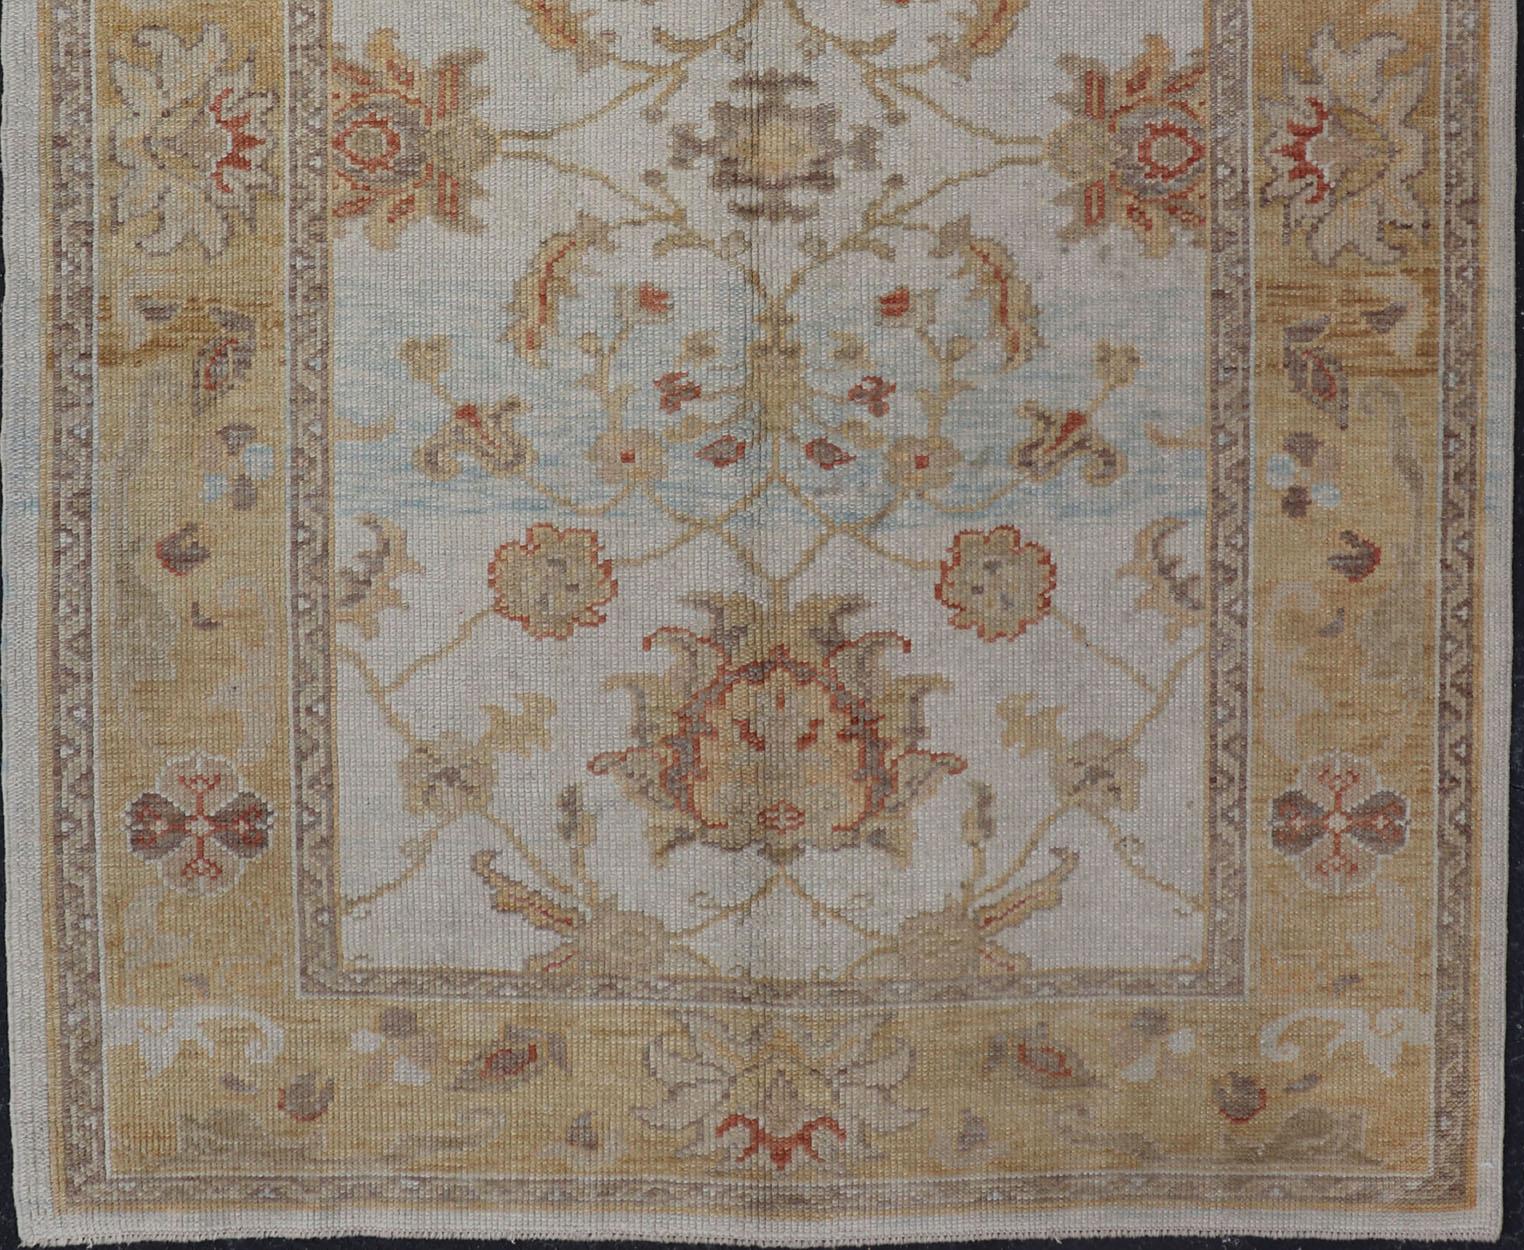 Stylized Reproduction Oushak rug from Turkey, Keivan Woven Arts, rug EN-115469, country of origin / type: Turkey / Oushak, circa 2000

This reproduction Turkish Oushak rug features a stylized vining floral design. The multi-tiered border features